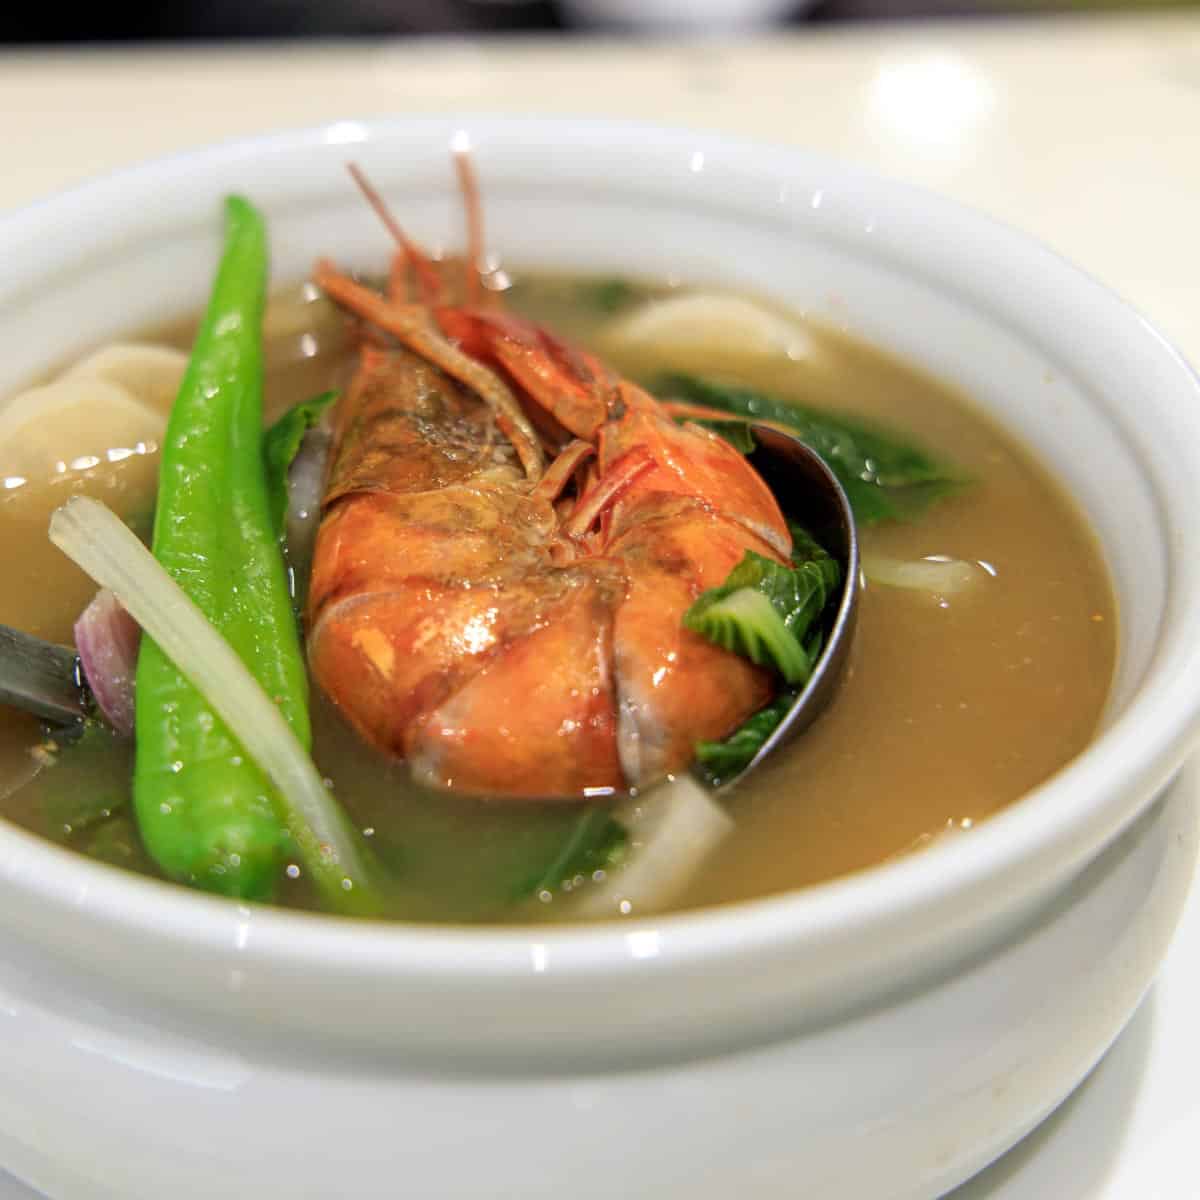 Shrimp sinigang with green chili pepper in a white bowl.